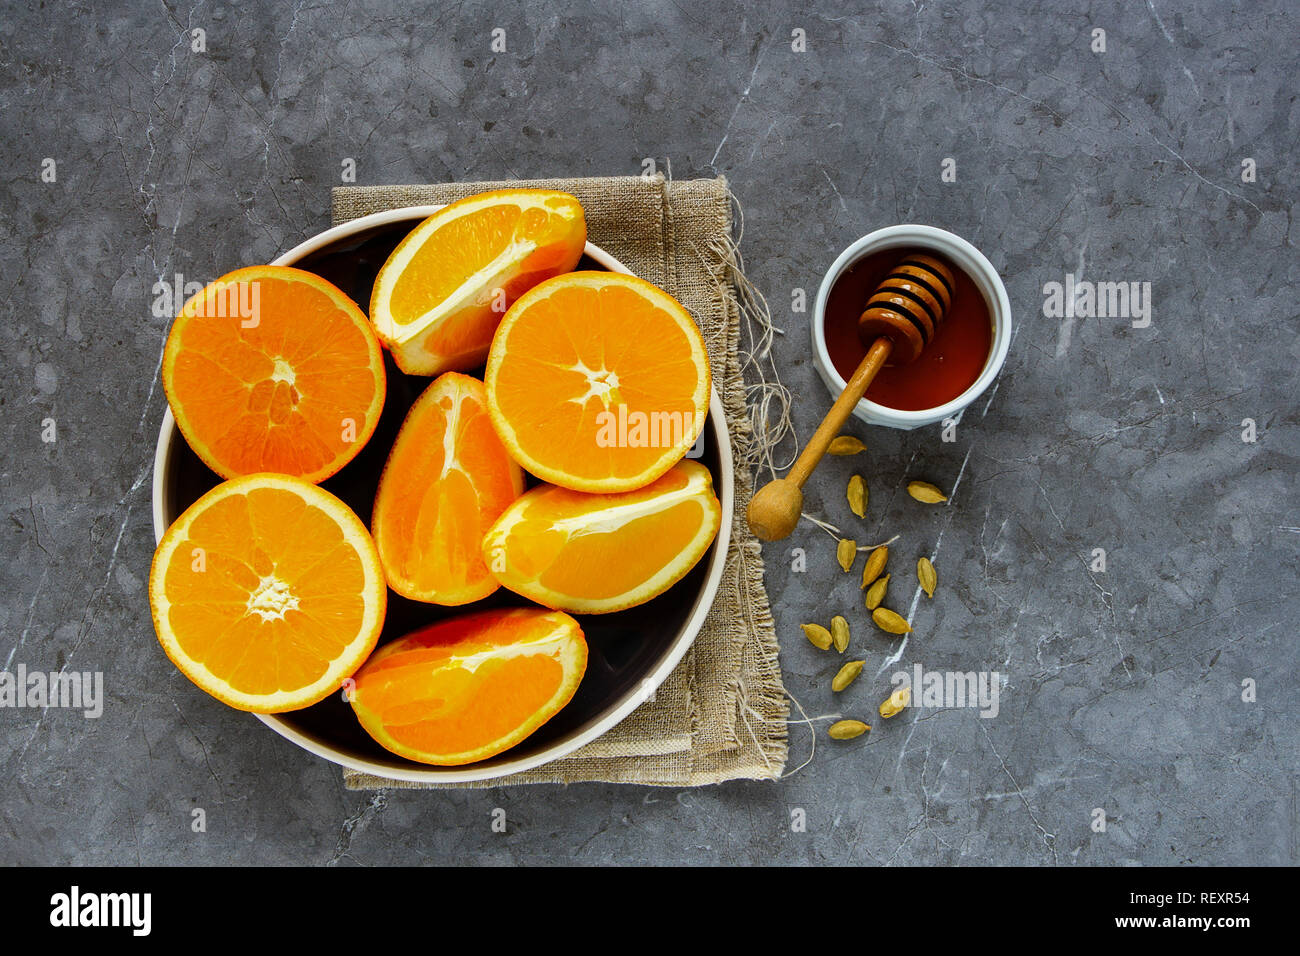 Making natural hot drink. Flat-lay of fresh oranges, honey and spices Stock Photo